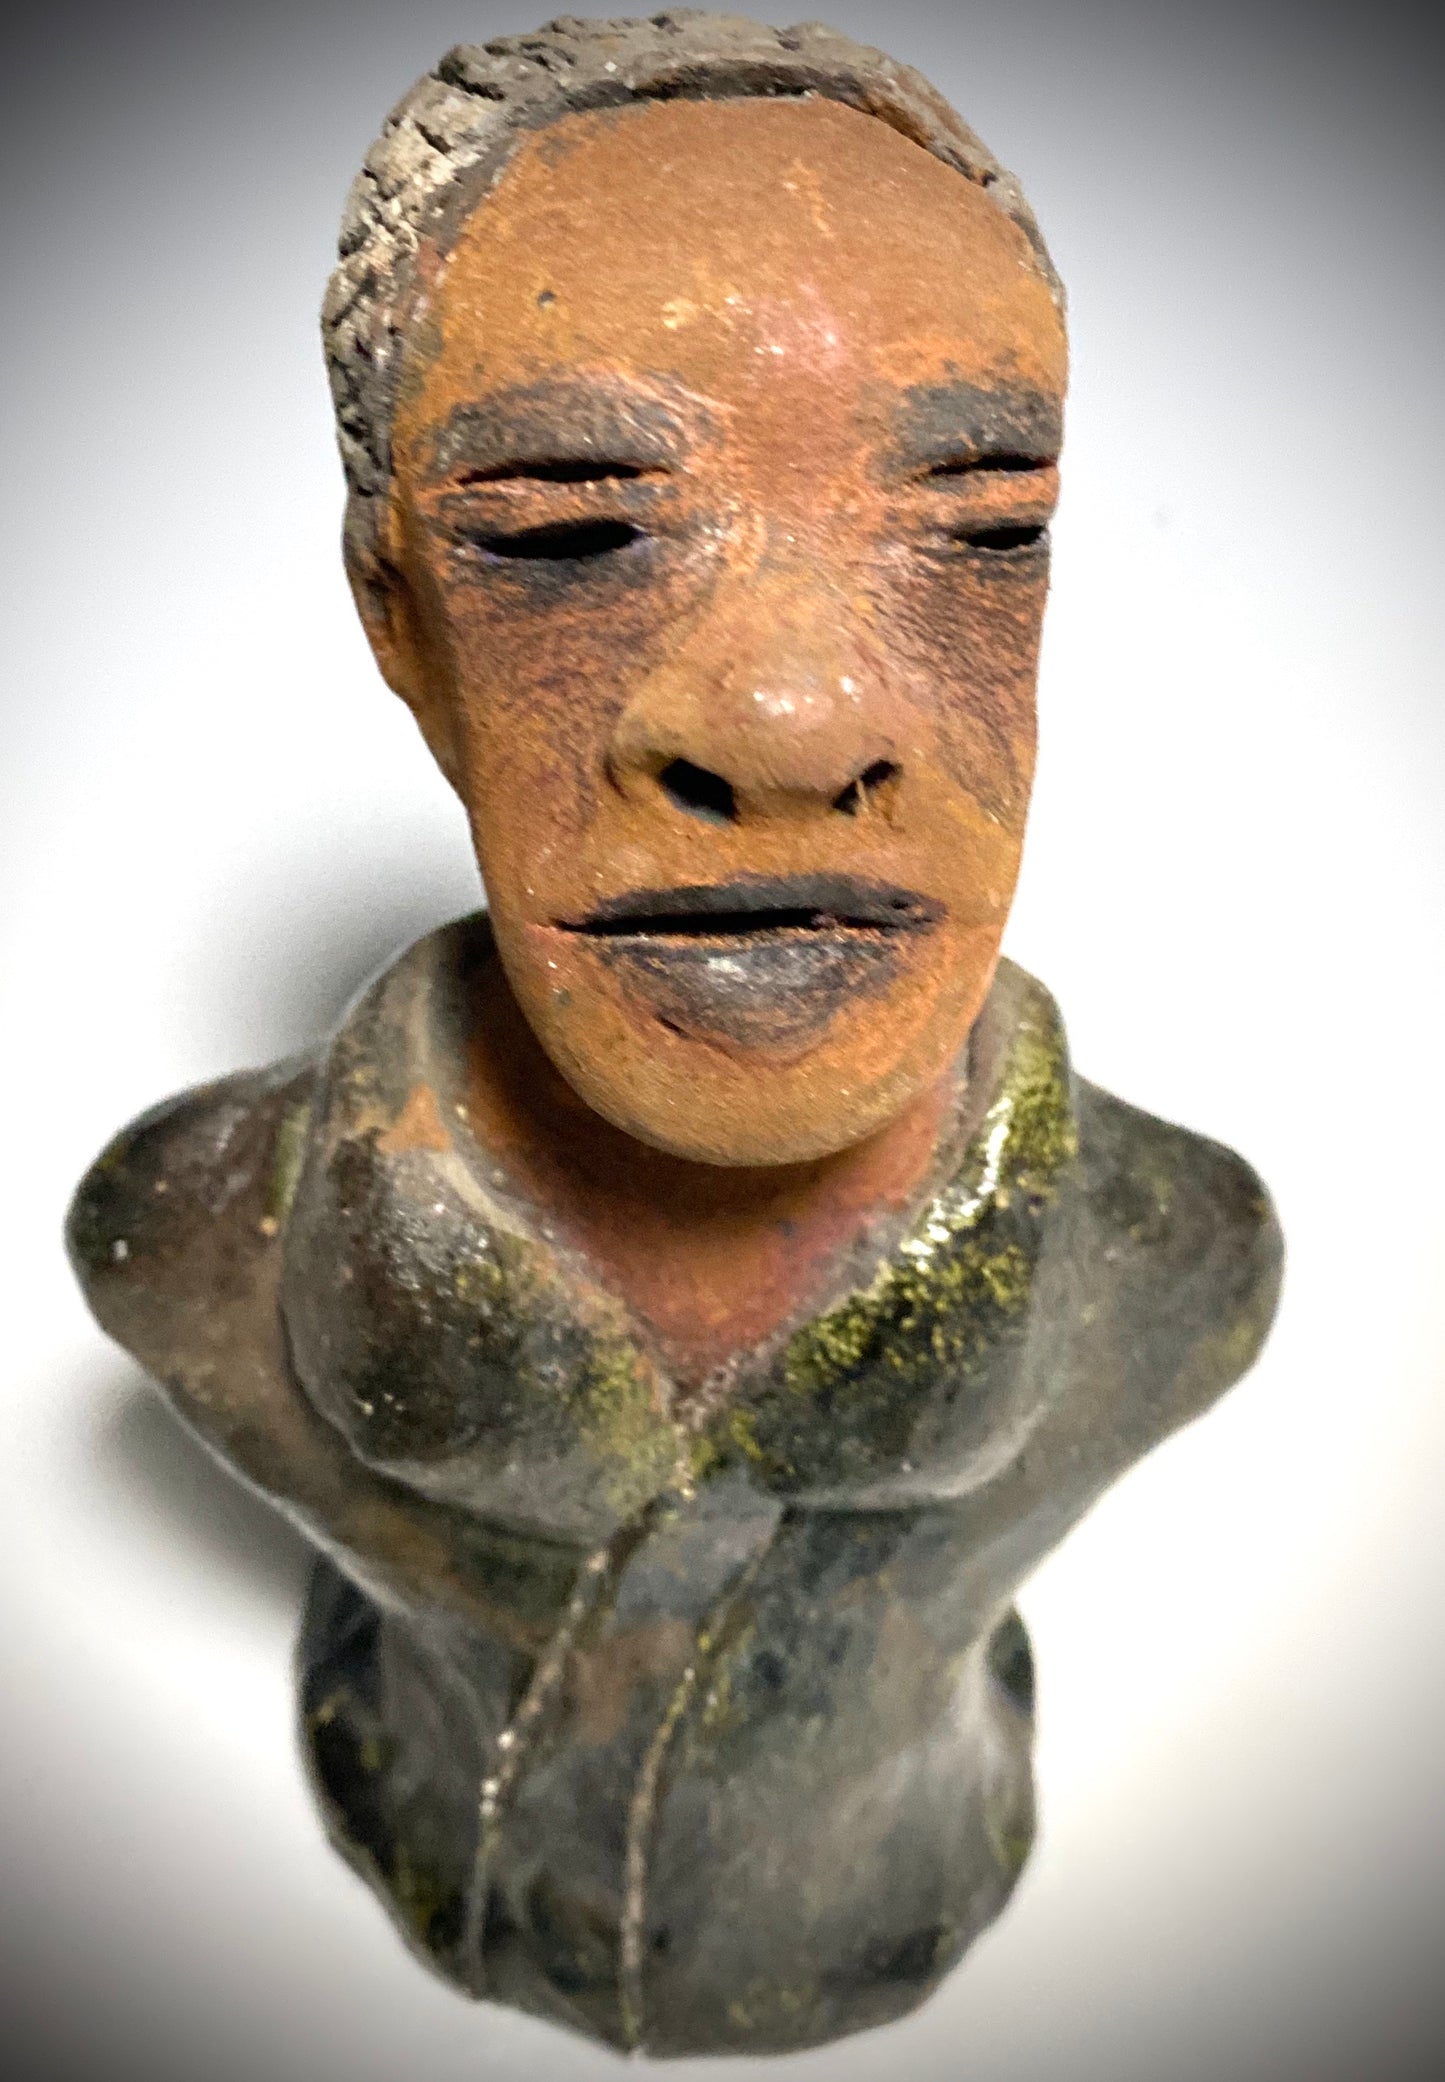 Mr. Charles has a story to tell!  Do you See the wisdom in his face? Mr. Charles  stands 5"x 3" x 2.5" and weighs 11 ozs. He wears a copper green metallic jacket. Mr. Charles's complexion is honey brown and he has salt and pepper hair.                      